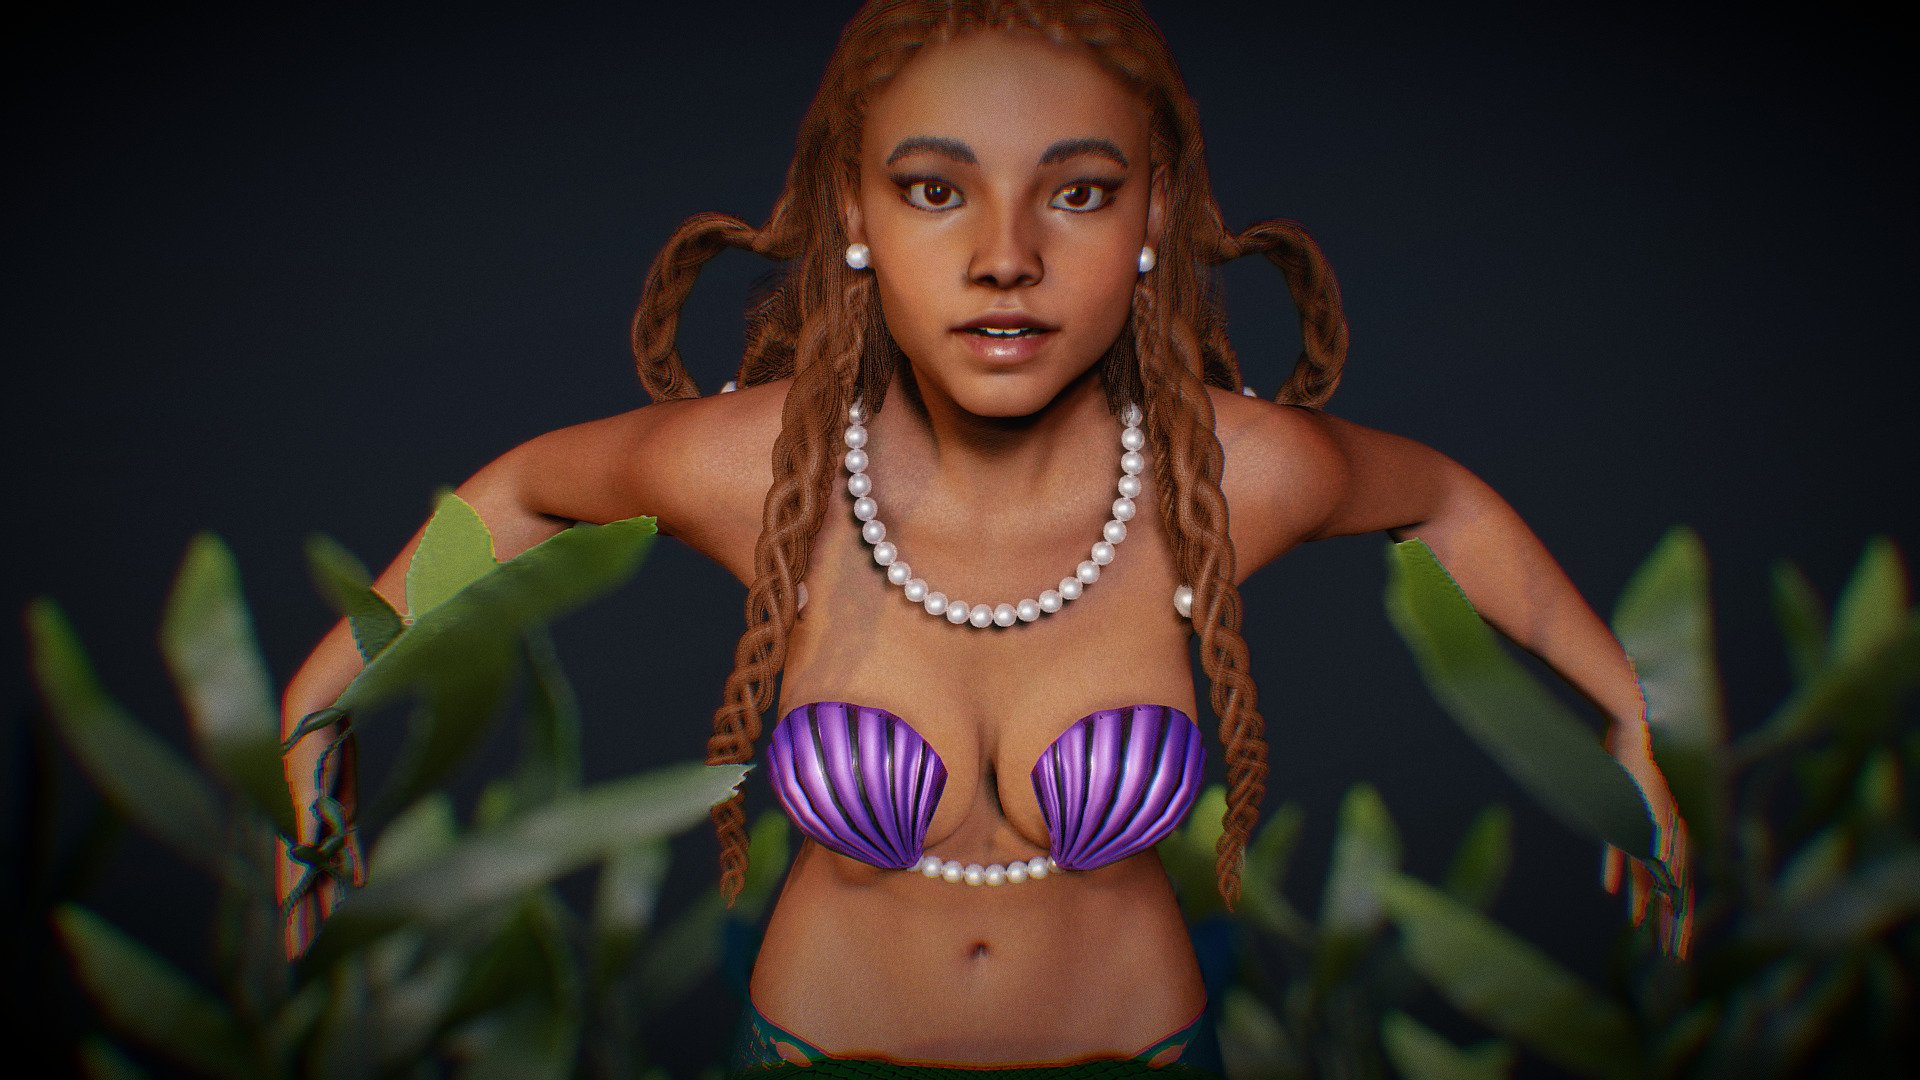 Mermaid Girl swimming  underwater. Basic animation loop.  Model in Blender file. Body Fully rigged, face basic rig. SSS subsurface scattering. mixamo bone names for animation. No FBX or OBJ format, only Blend file 3d model